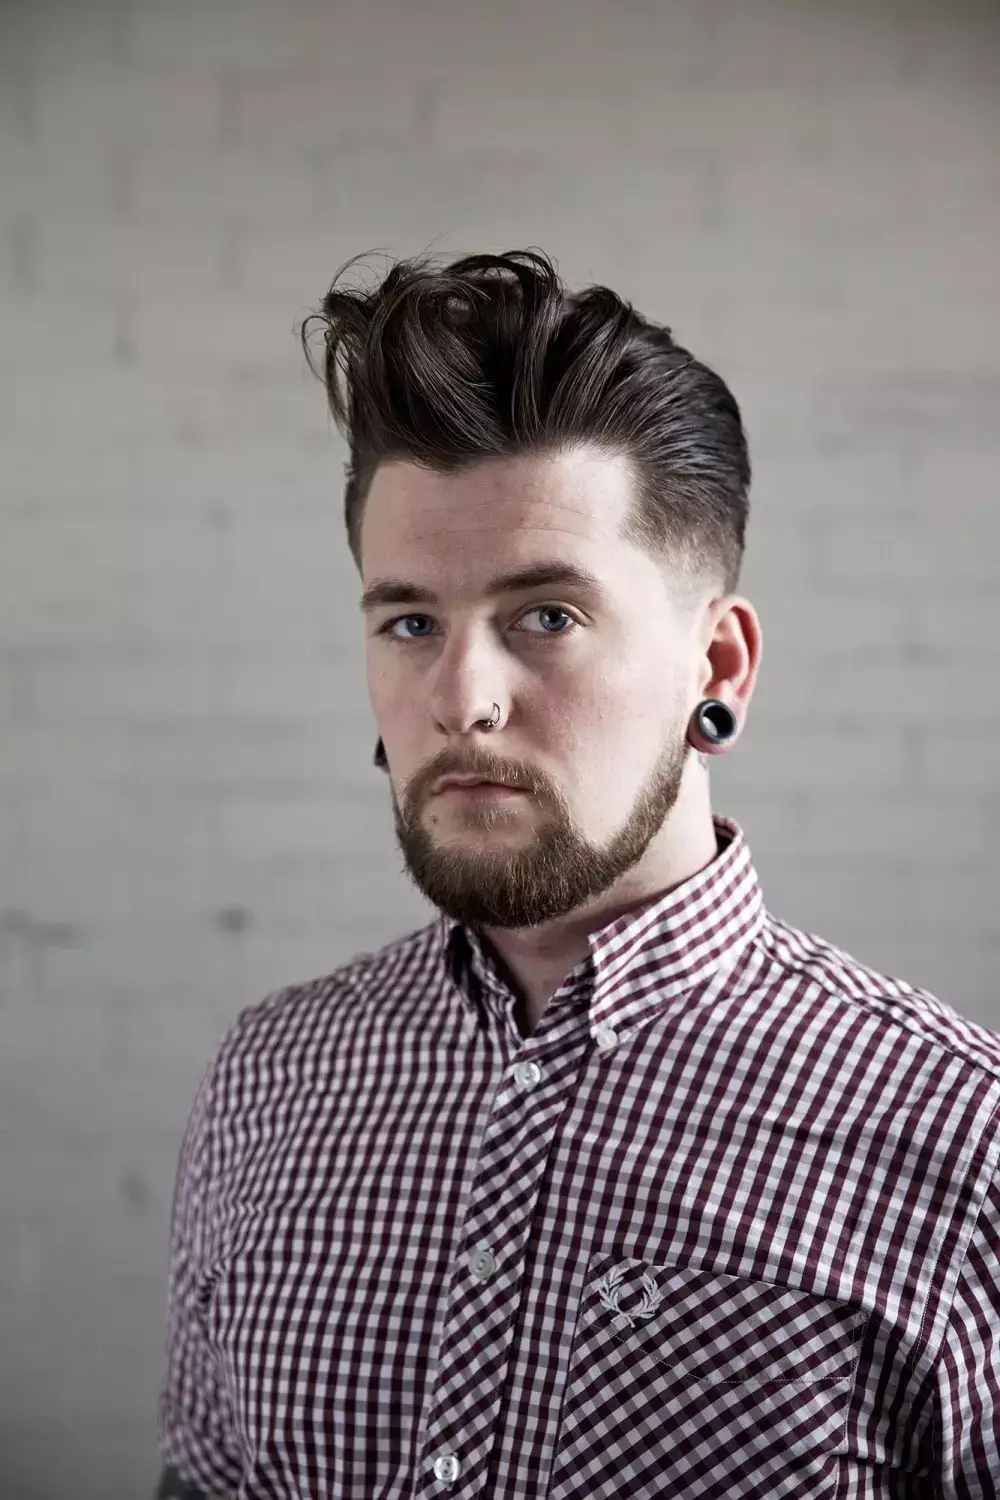 Man with large quiff with piercings, beard and checked shirt